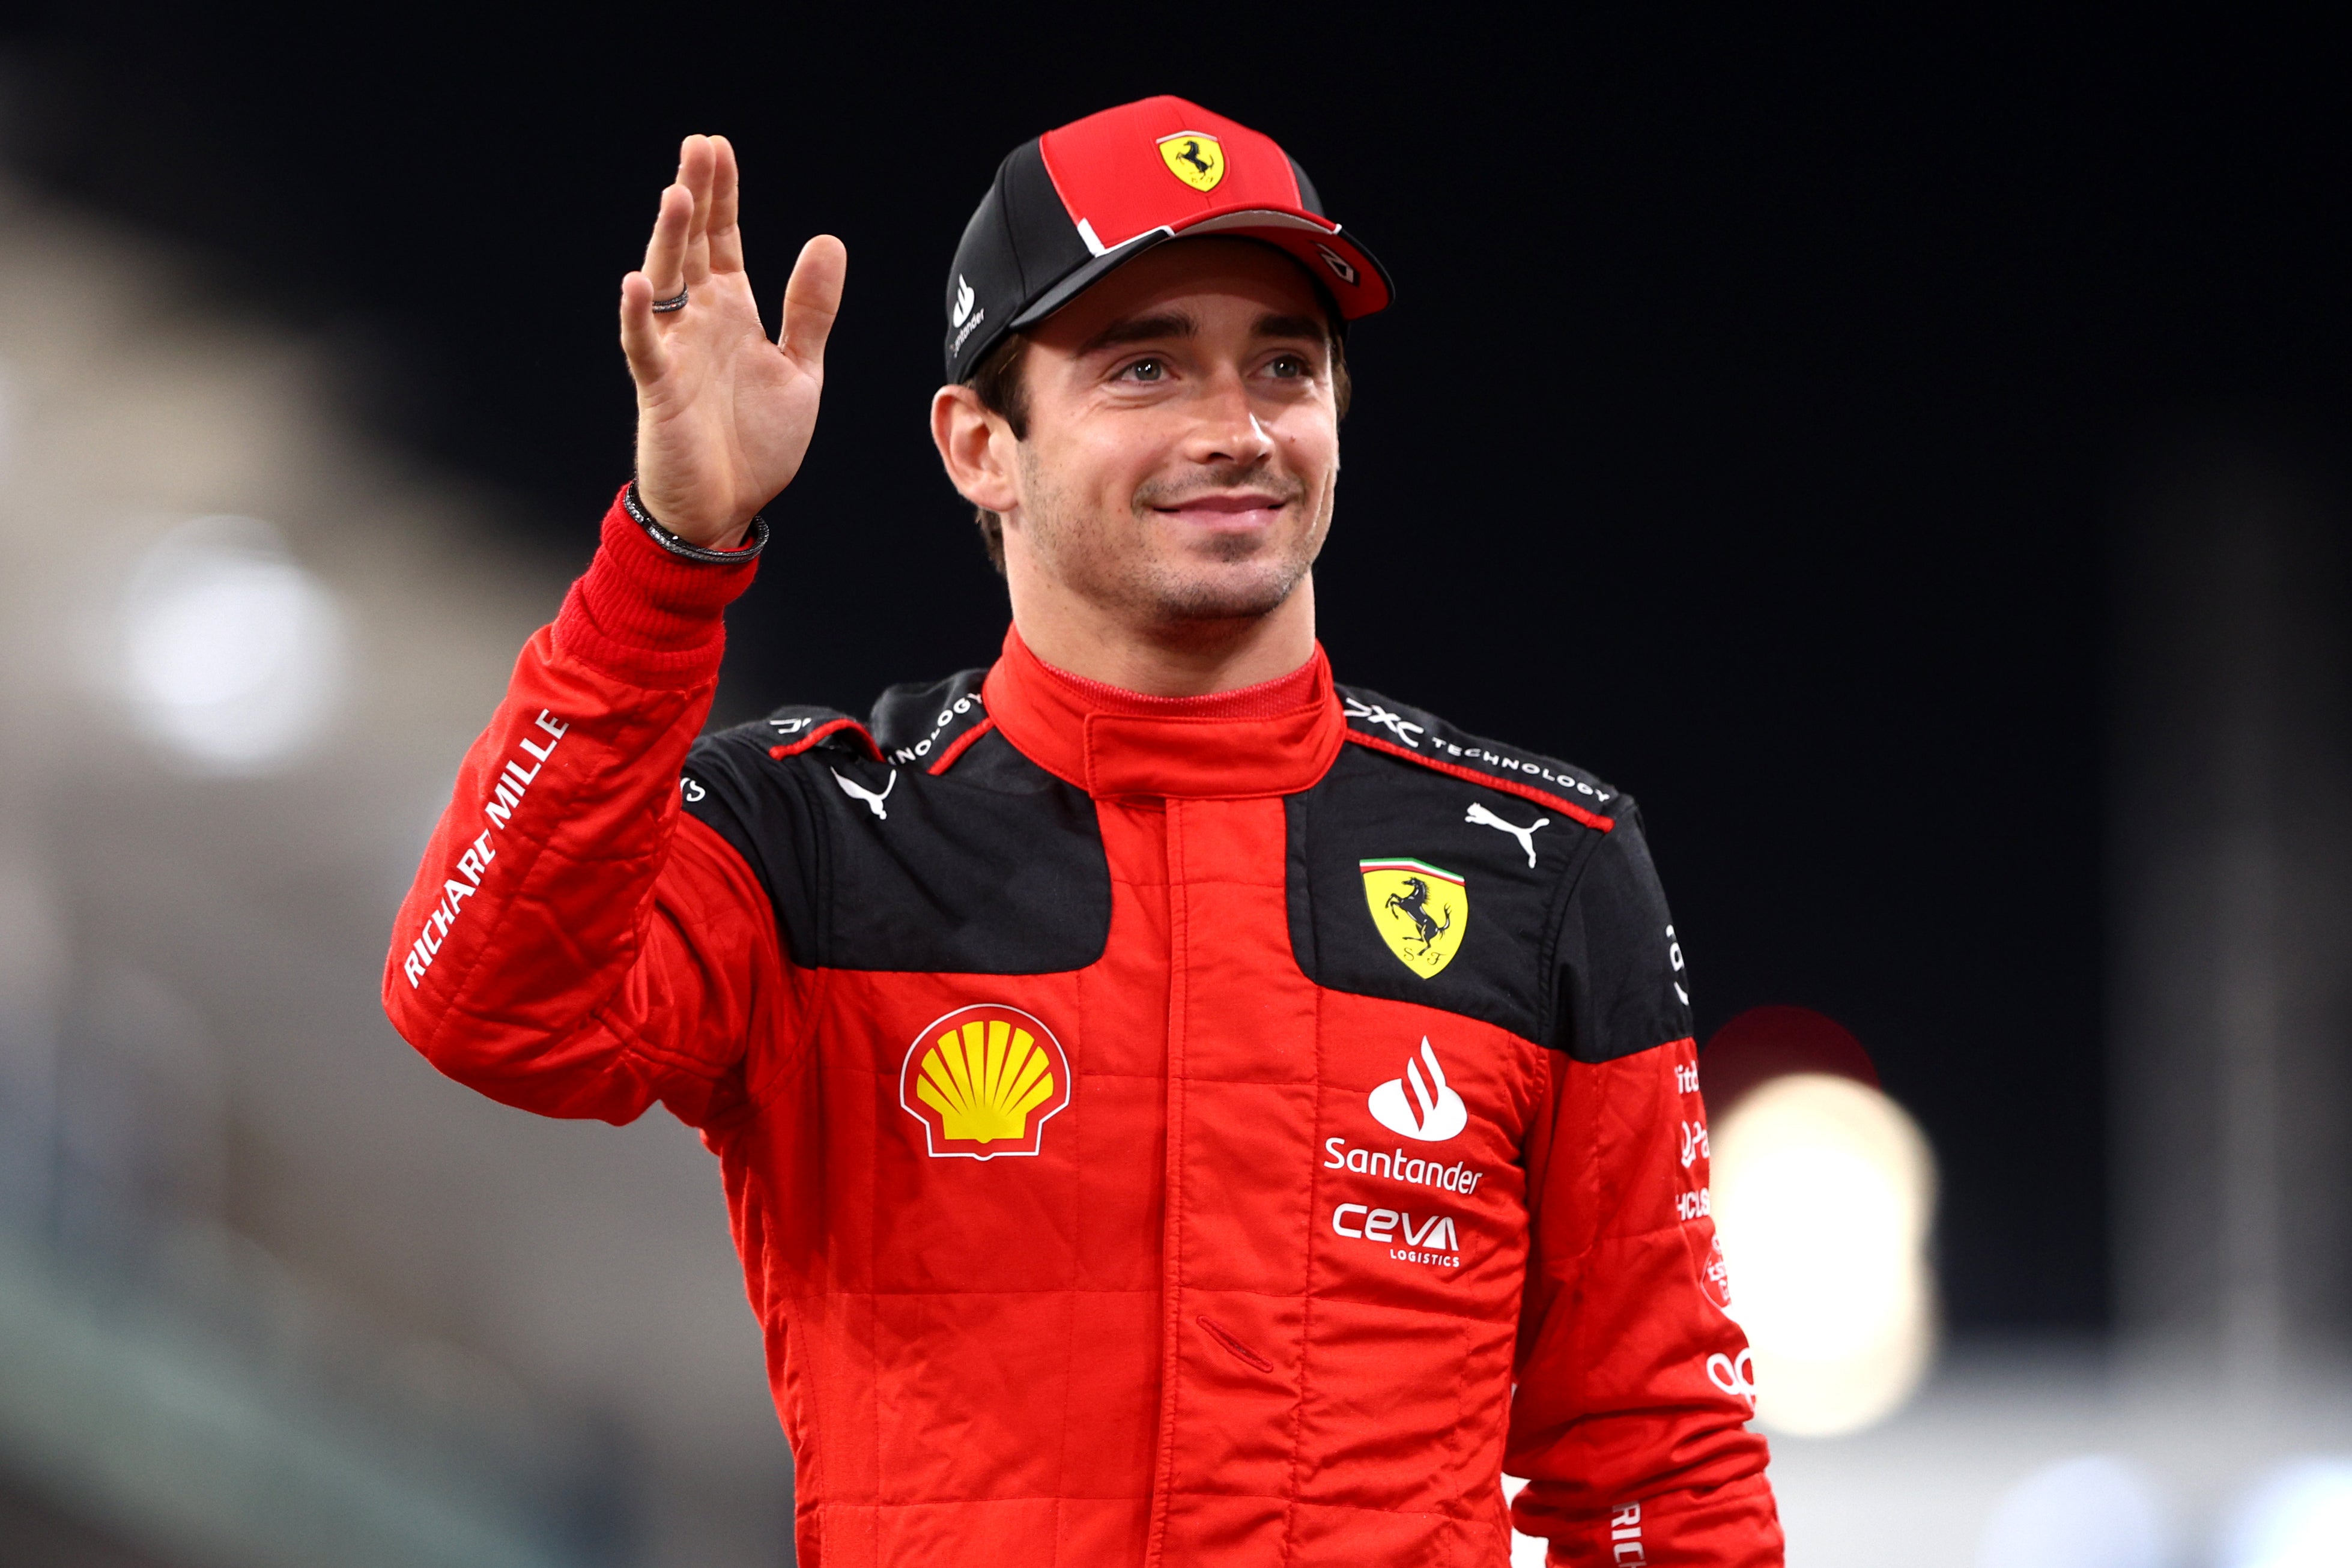 The significance of Leclerc's latest long-term Ferrari F1 contract